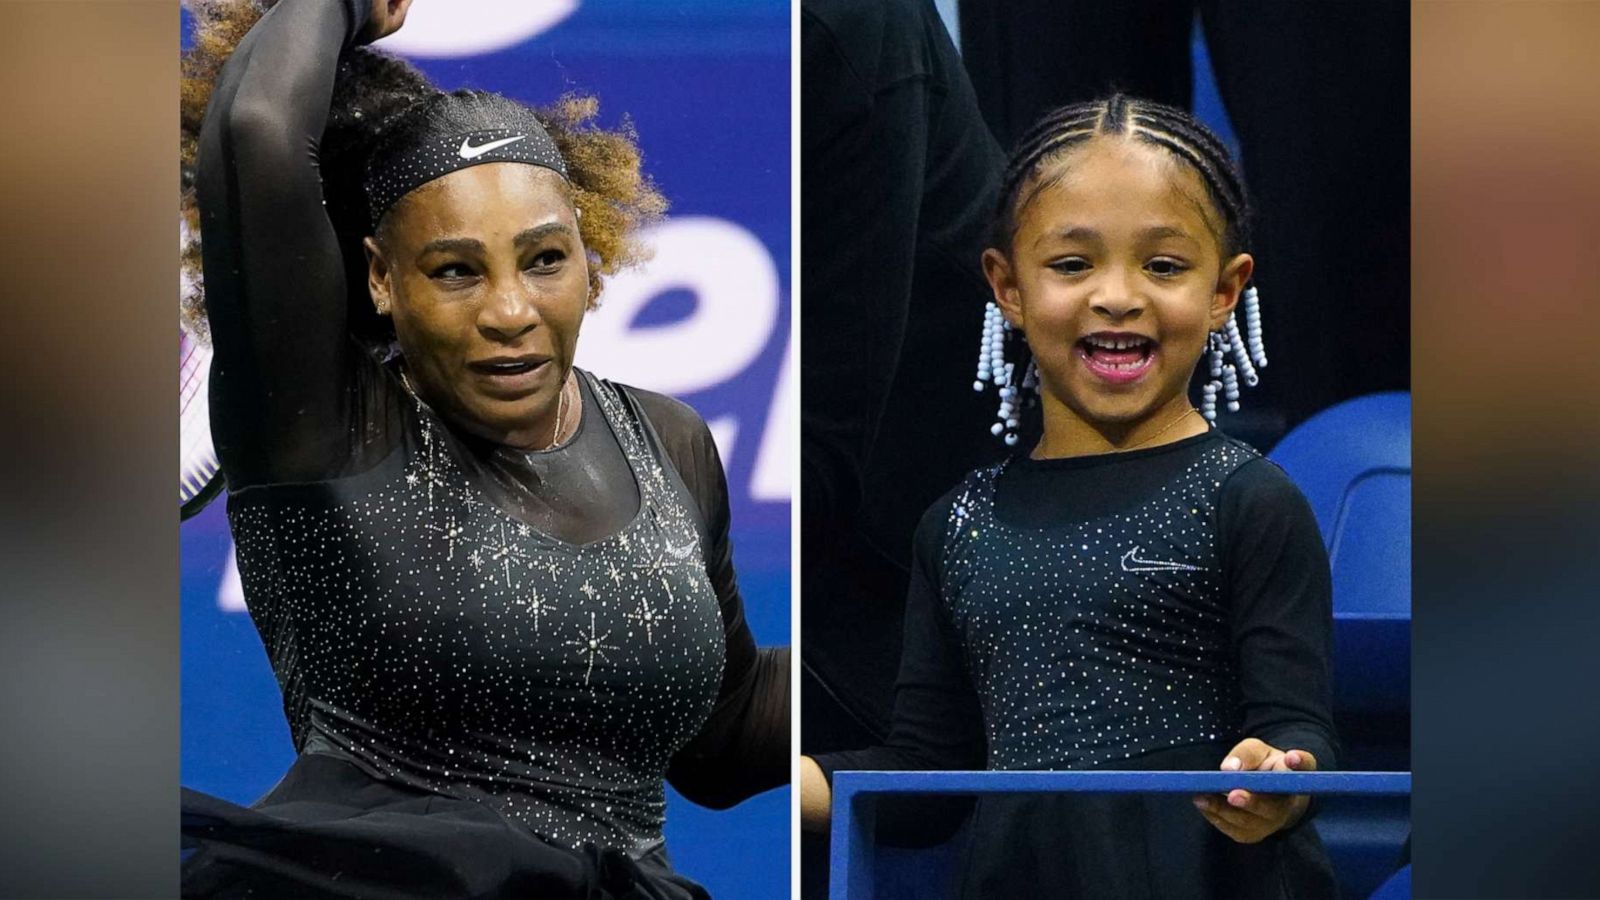 Serena Williams matches with daughter in custom figure skating-inspired Nike dress at US Open